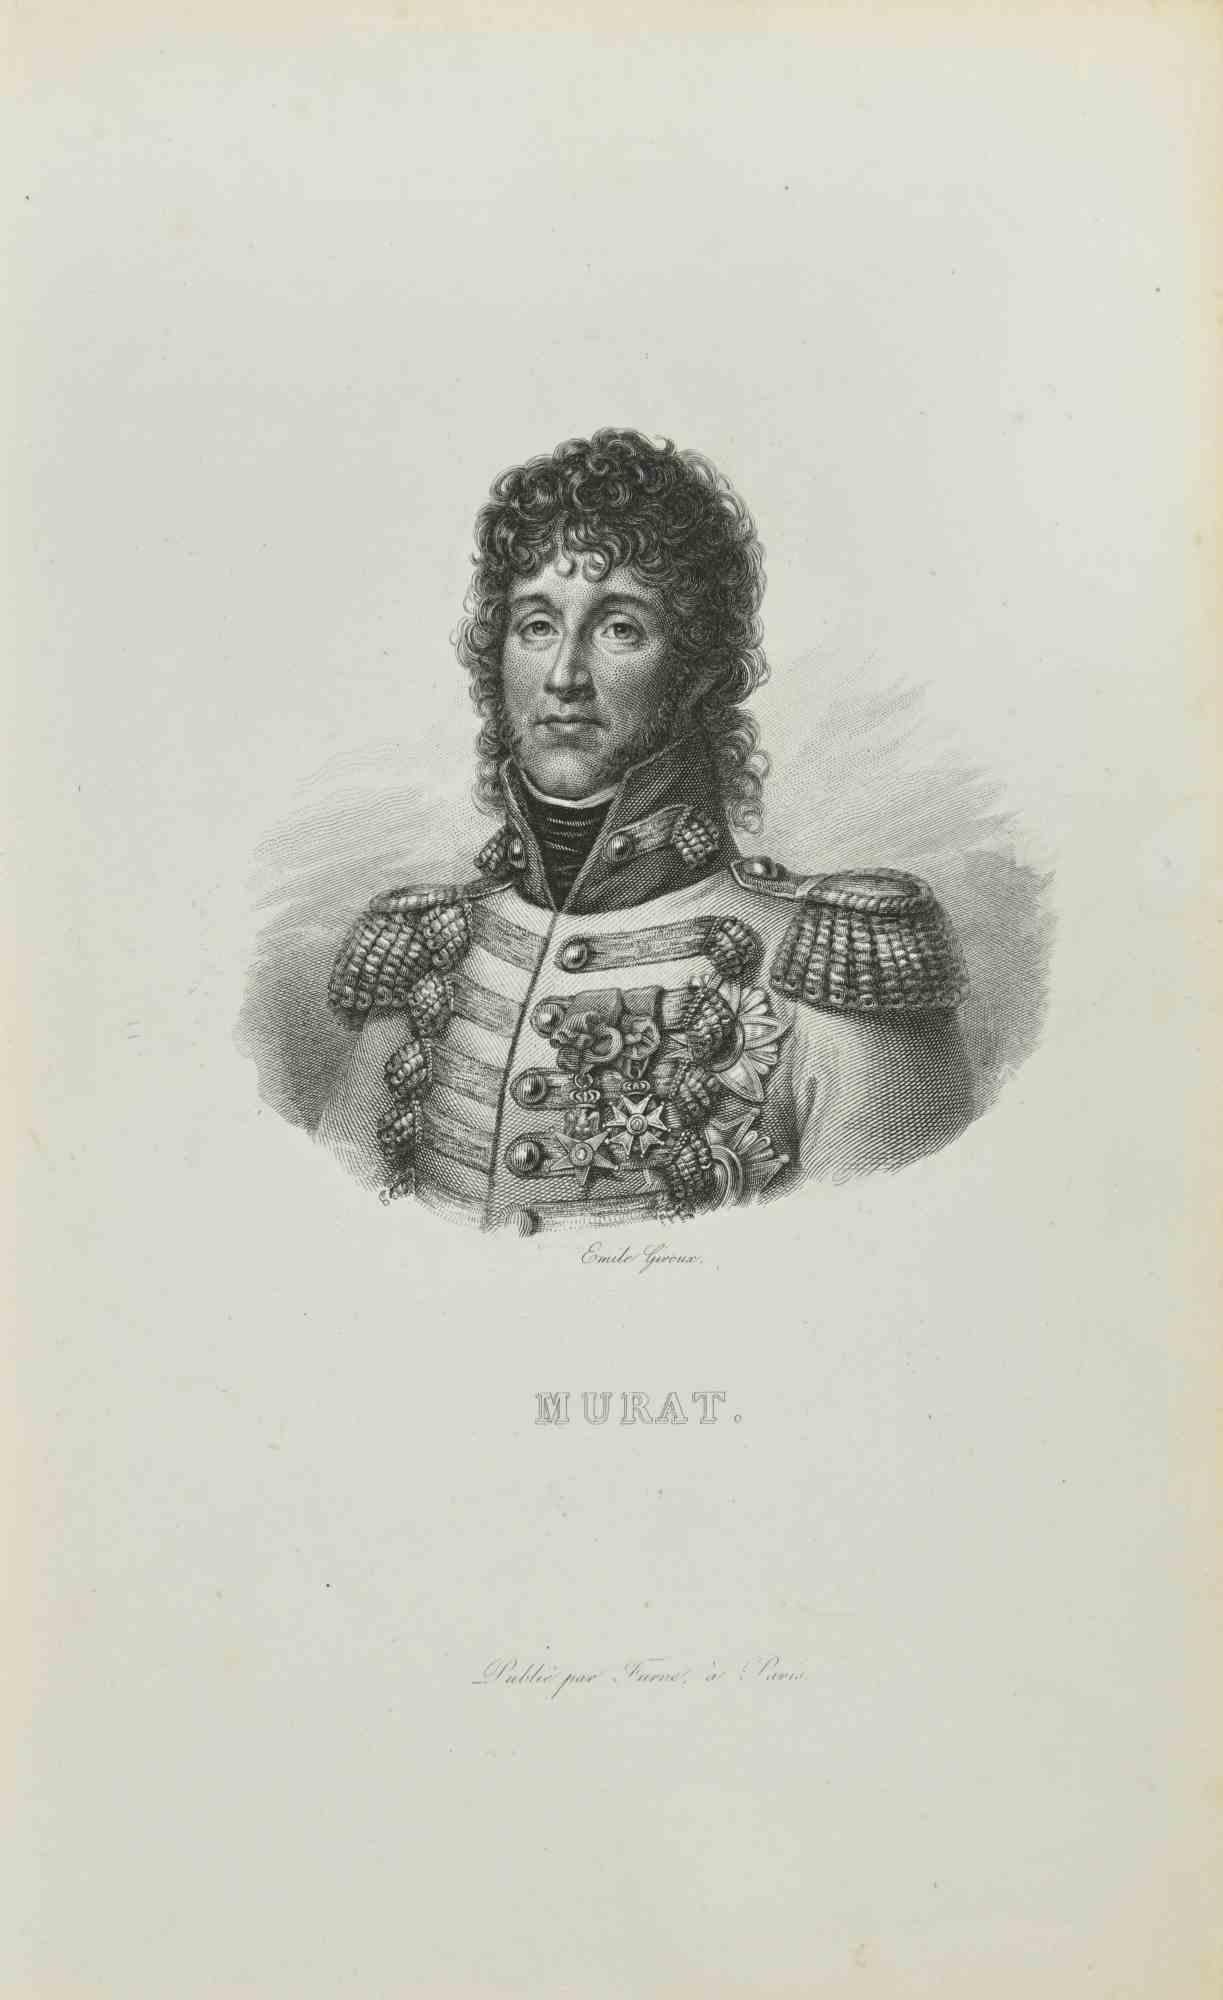 Portrait of Murat  is an etching that belongs to the suite AtlasBatt realized for Jacques Norvins Histoire de Napoleon, published in 1837.

Author Jacques Norvins published one of the most comprehensive and influential histories on the life and